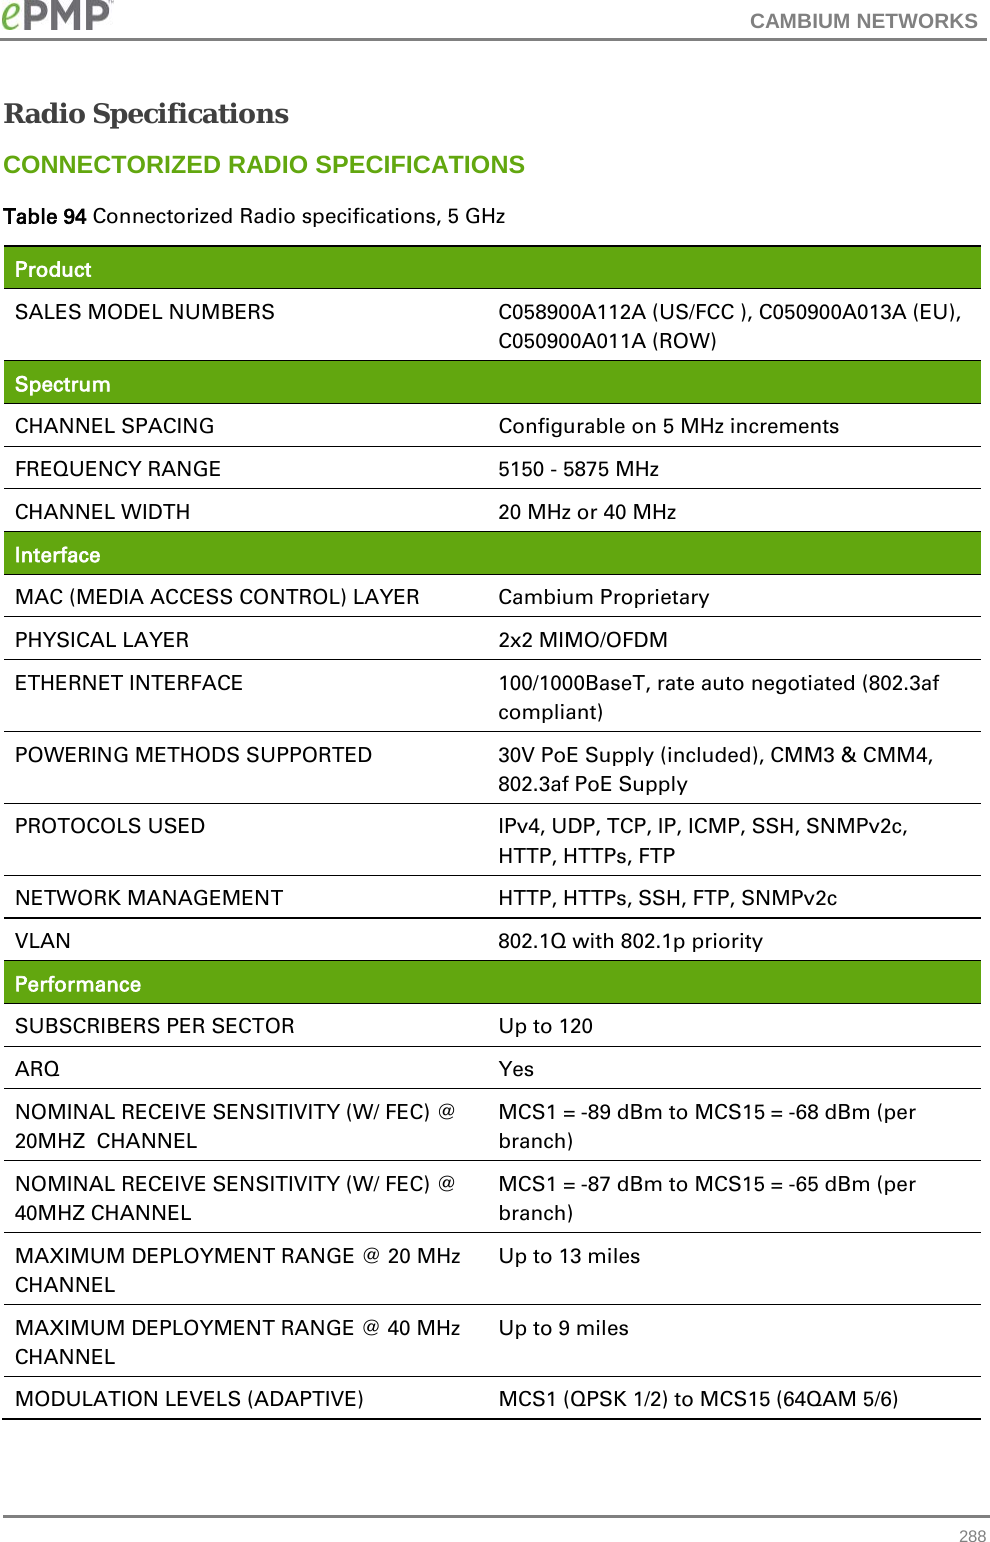 CAMBIUM NETWORKS  Radio Specifications CONNECTORIZED RADIO SPECIFICATIONS Table 94 Connectorized Radio specifications, 5 GHz Product  SALES MODEL NUMBERS C058900A112A (US/FCC ), C050900A013A (EU), C050900A011A (ROW) Spectrum  CHANNEL SPACING Configurable on 5 MHz increments FREQUENCY RANGE 5150 - 5875 MHz CHANNEL WIDTH 20 MHz or 40 MHz Interface  MAC (MEDIA ACCESS CONTROL) LAYER Cambium Proprietary PHYSICAL LAYER 2x2 MIMO/OFDM ETHERNET INTERFACE 100/1000BaseT, rate auto negotiated (802.3af compliant) POWERING METHODS SUPPORTED 30V PoE Supply (included), CMM3 &amp; CMM4, 802.3af PoE Supply PROTOCOLS USED IPv4, UDP, TCP, IP, ICMP, SSH, SNMPv2c, HTTP, HTTPs, FTP NETWORK MANAGEMENT HTTP, HTTPs, SSH, FTP, SNMPv2c VLAN 802.1Q with 802.1p priority Performance  SUBSCRIBERS PER SECTOR Up to 120 ARQ Yes NOMINAL RECEIVE SENSITIVITY (W/ FEC) @ 20MHZ  CHANNEL MCS1 = -89 dBm to MCS15 = -68 dBm (per branch) NOMINAL RECEIVE SENSITIVITY (W/ FEC) @ 40MHZ CHANNEL MCS1 = -87 dBm to MCS15 = -65 dBm (per branch) MAXIMUM DEPLOYMENT RANGE @ 20 MHz CHANNEL Up to 13 miles MAXIMUM DEPLOYMENT RANGE @ 40 MHz CHANNEL Up to 9 miles MODULATION LEVELS (ADAPTIVE)  MCS1 (QPSK 1/2) to MCS15 (64QAM 5/6)  288 